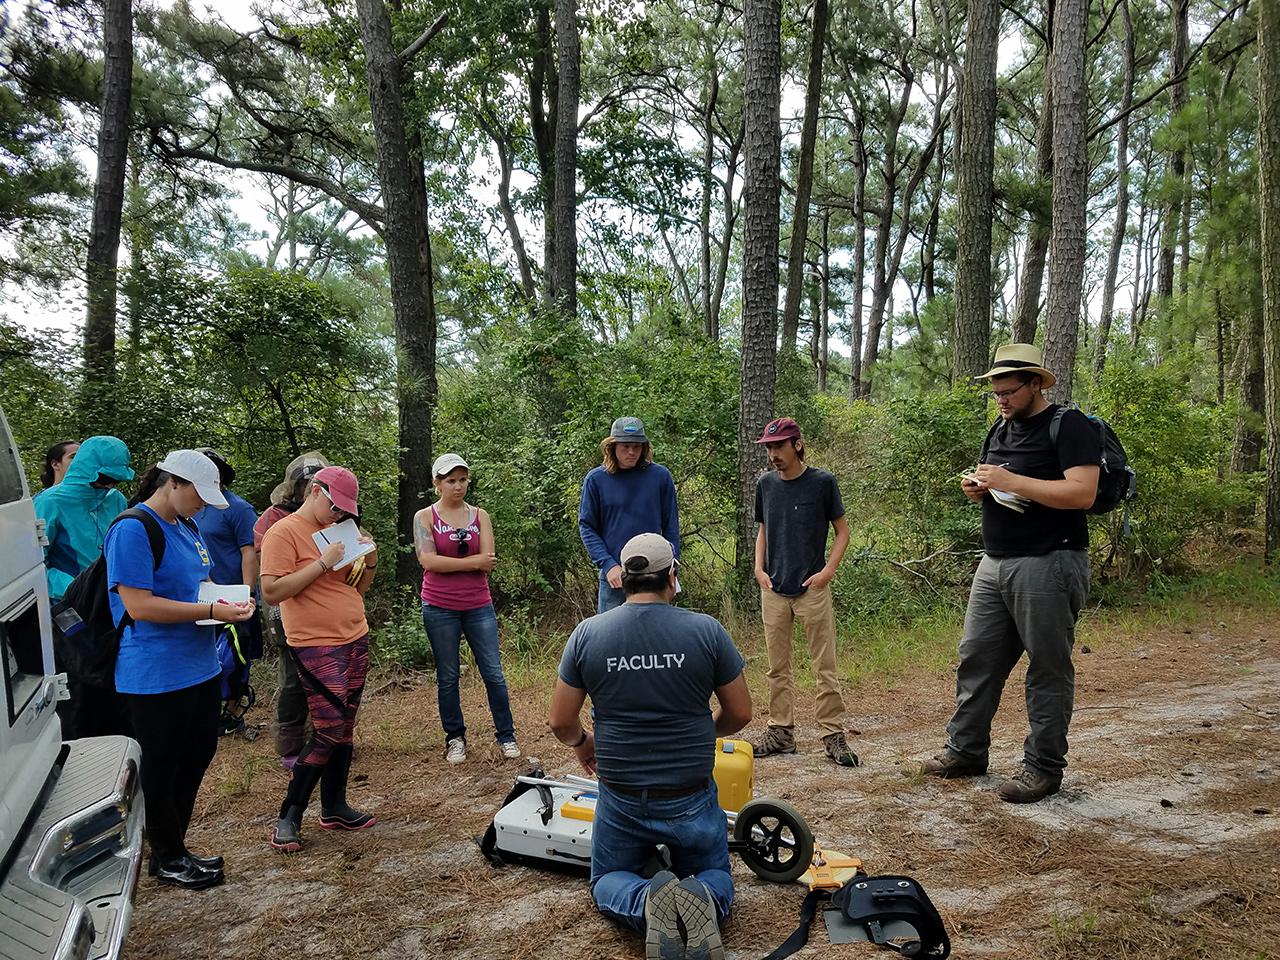 Students in the maritime forest with GPR